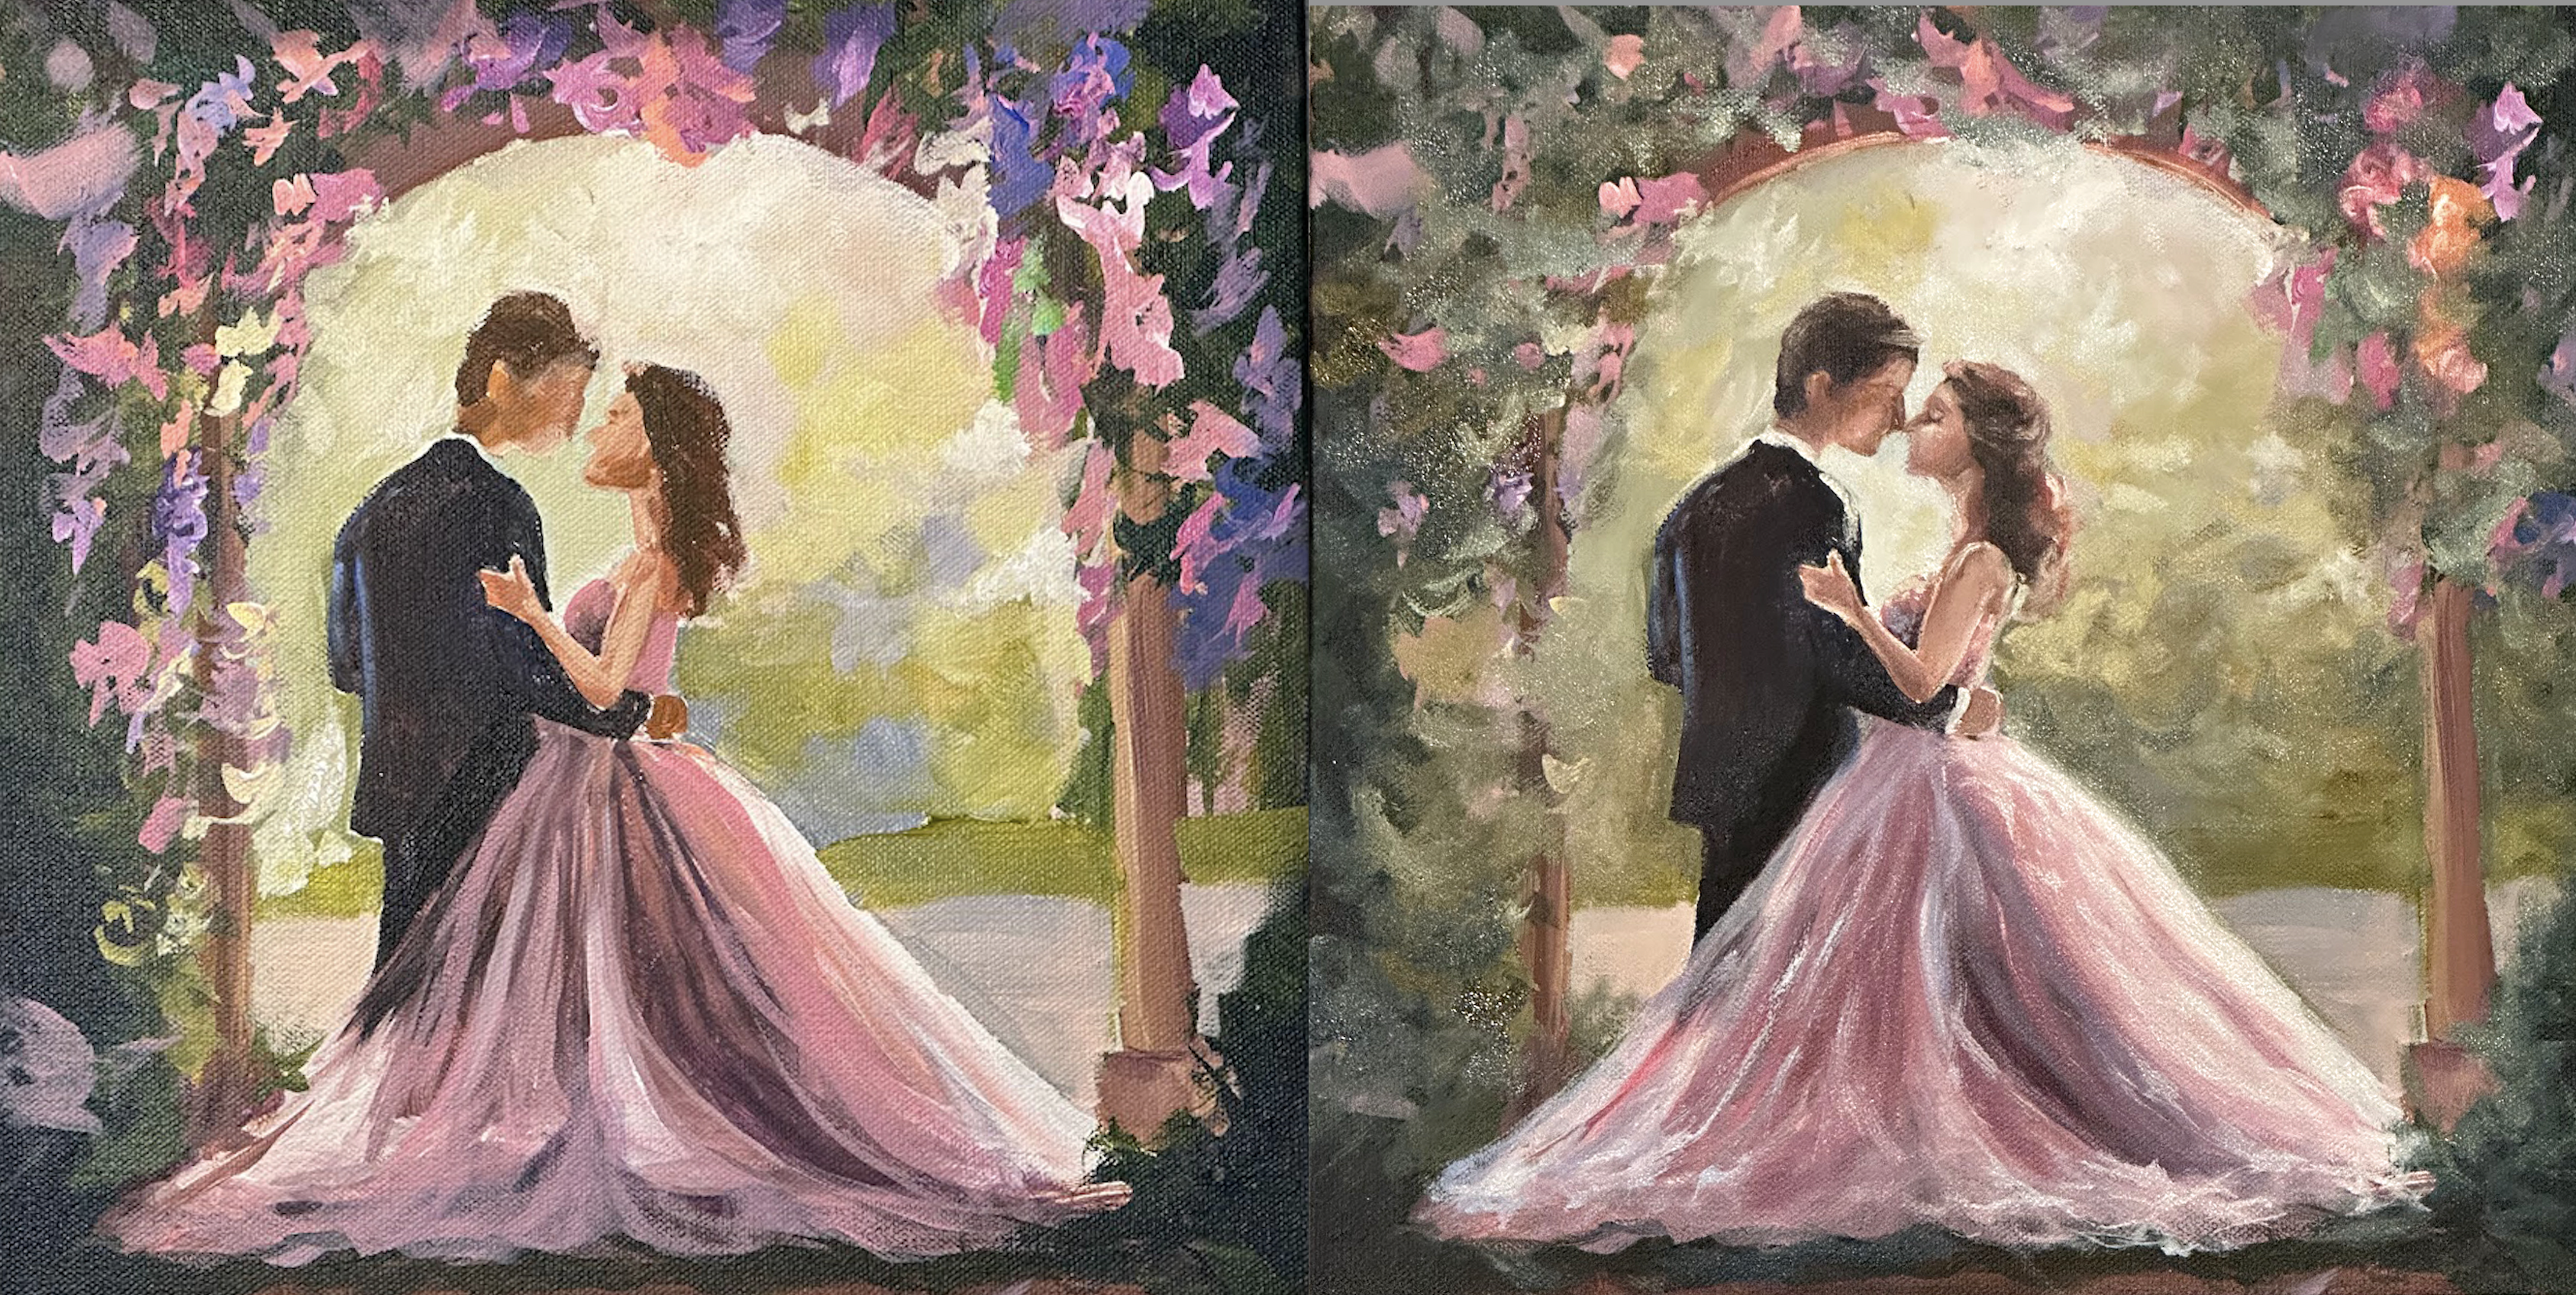 Wedding painting progression showing the completion level by the end of the wedding and the after studio touch ups.